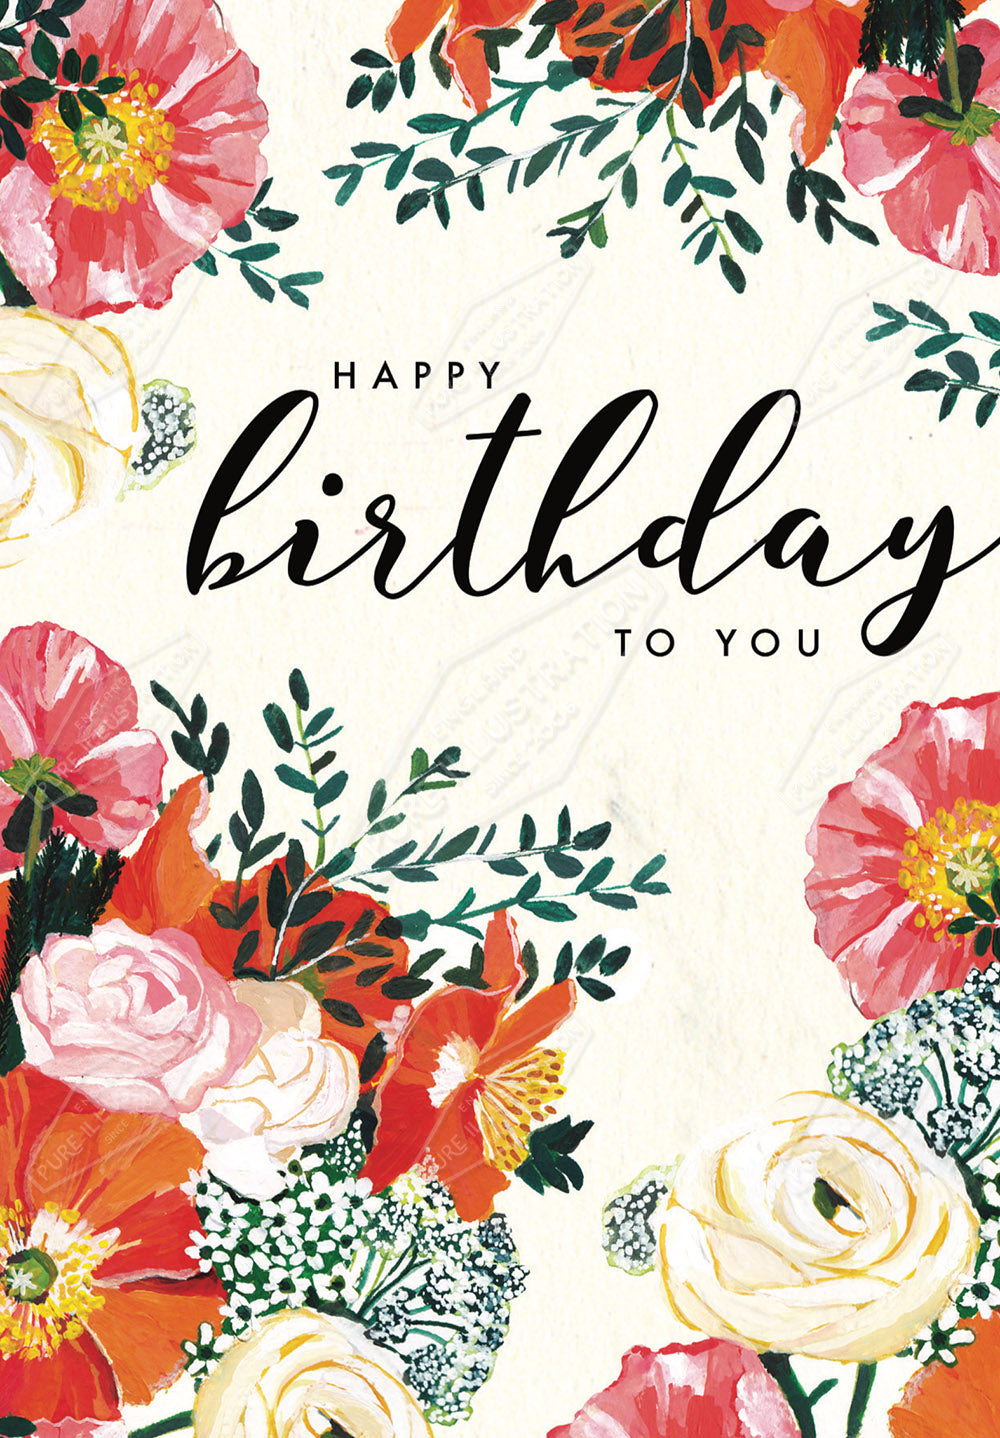 00034366EST- Emily Stalley is represented by Pure Art Licensing Agency - Birthday Greeting Card Design